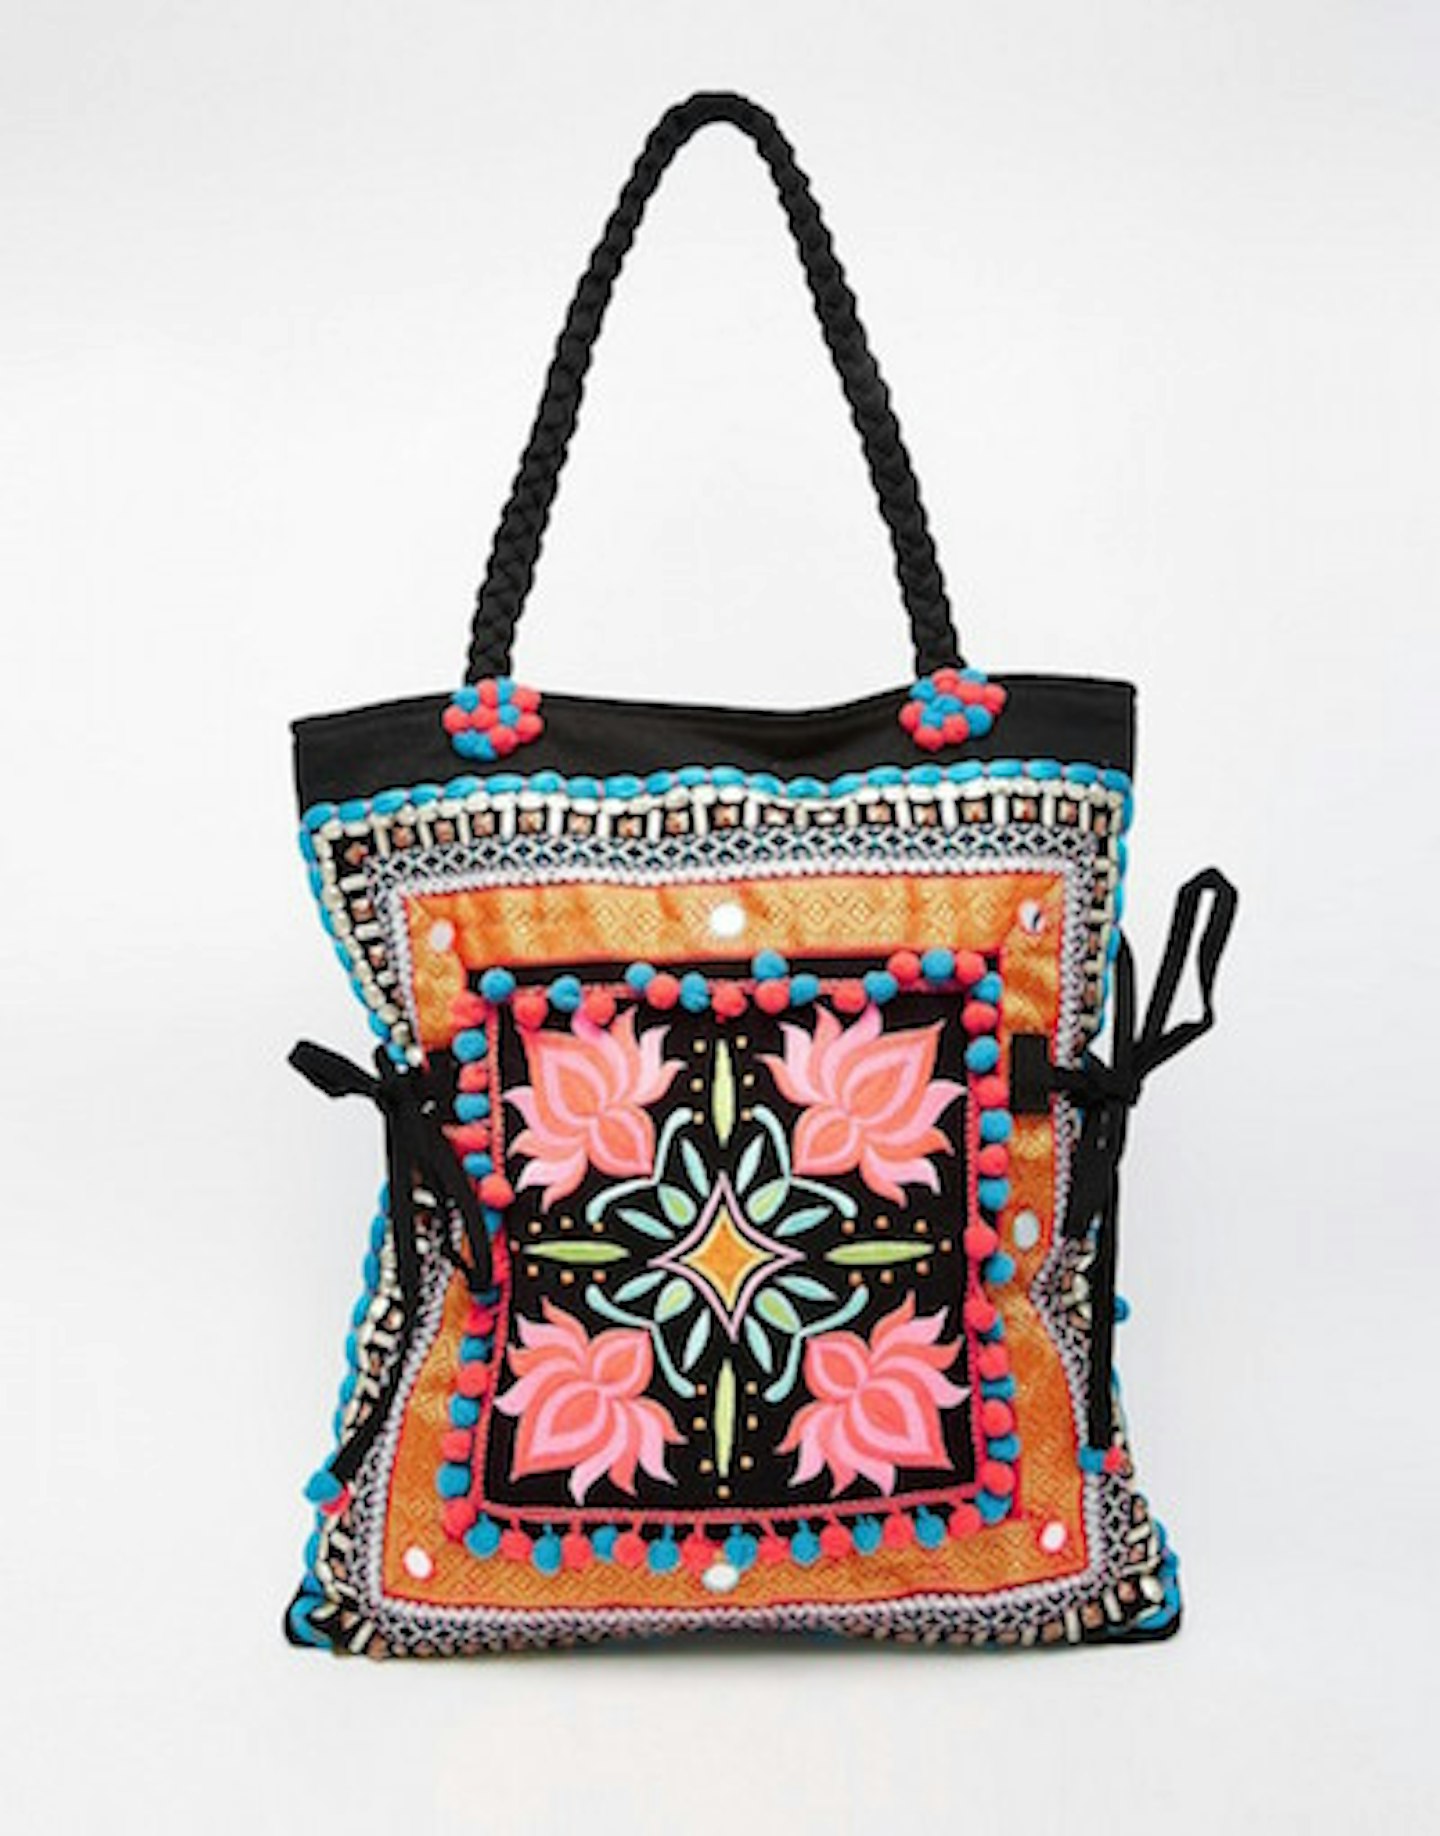 Glamorous. Black with colourful embroidery canvas bag.